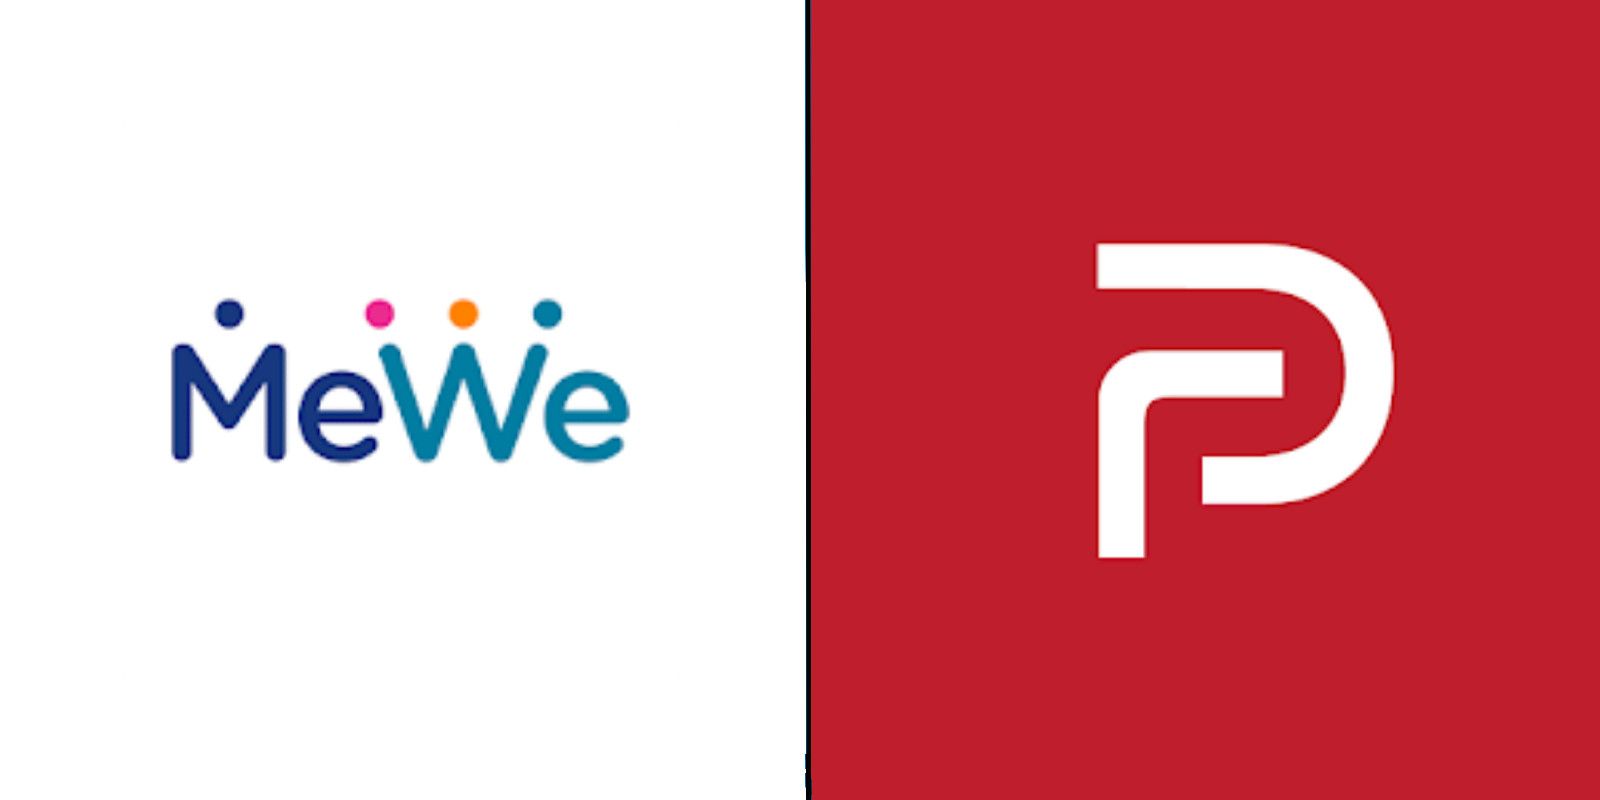 What Is Mewe and How Is It Different?